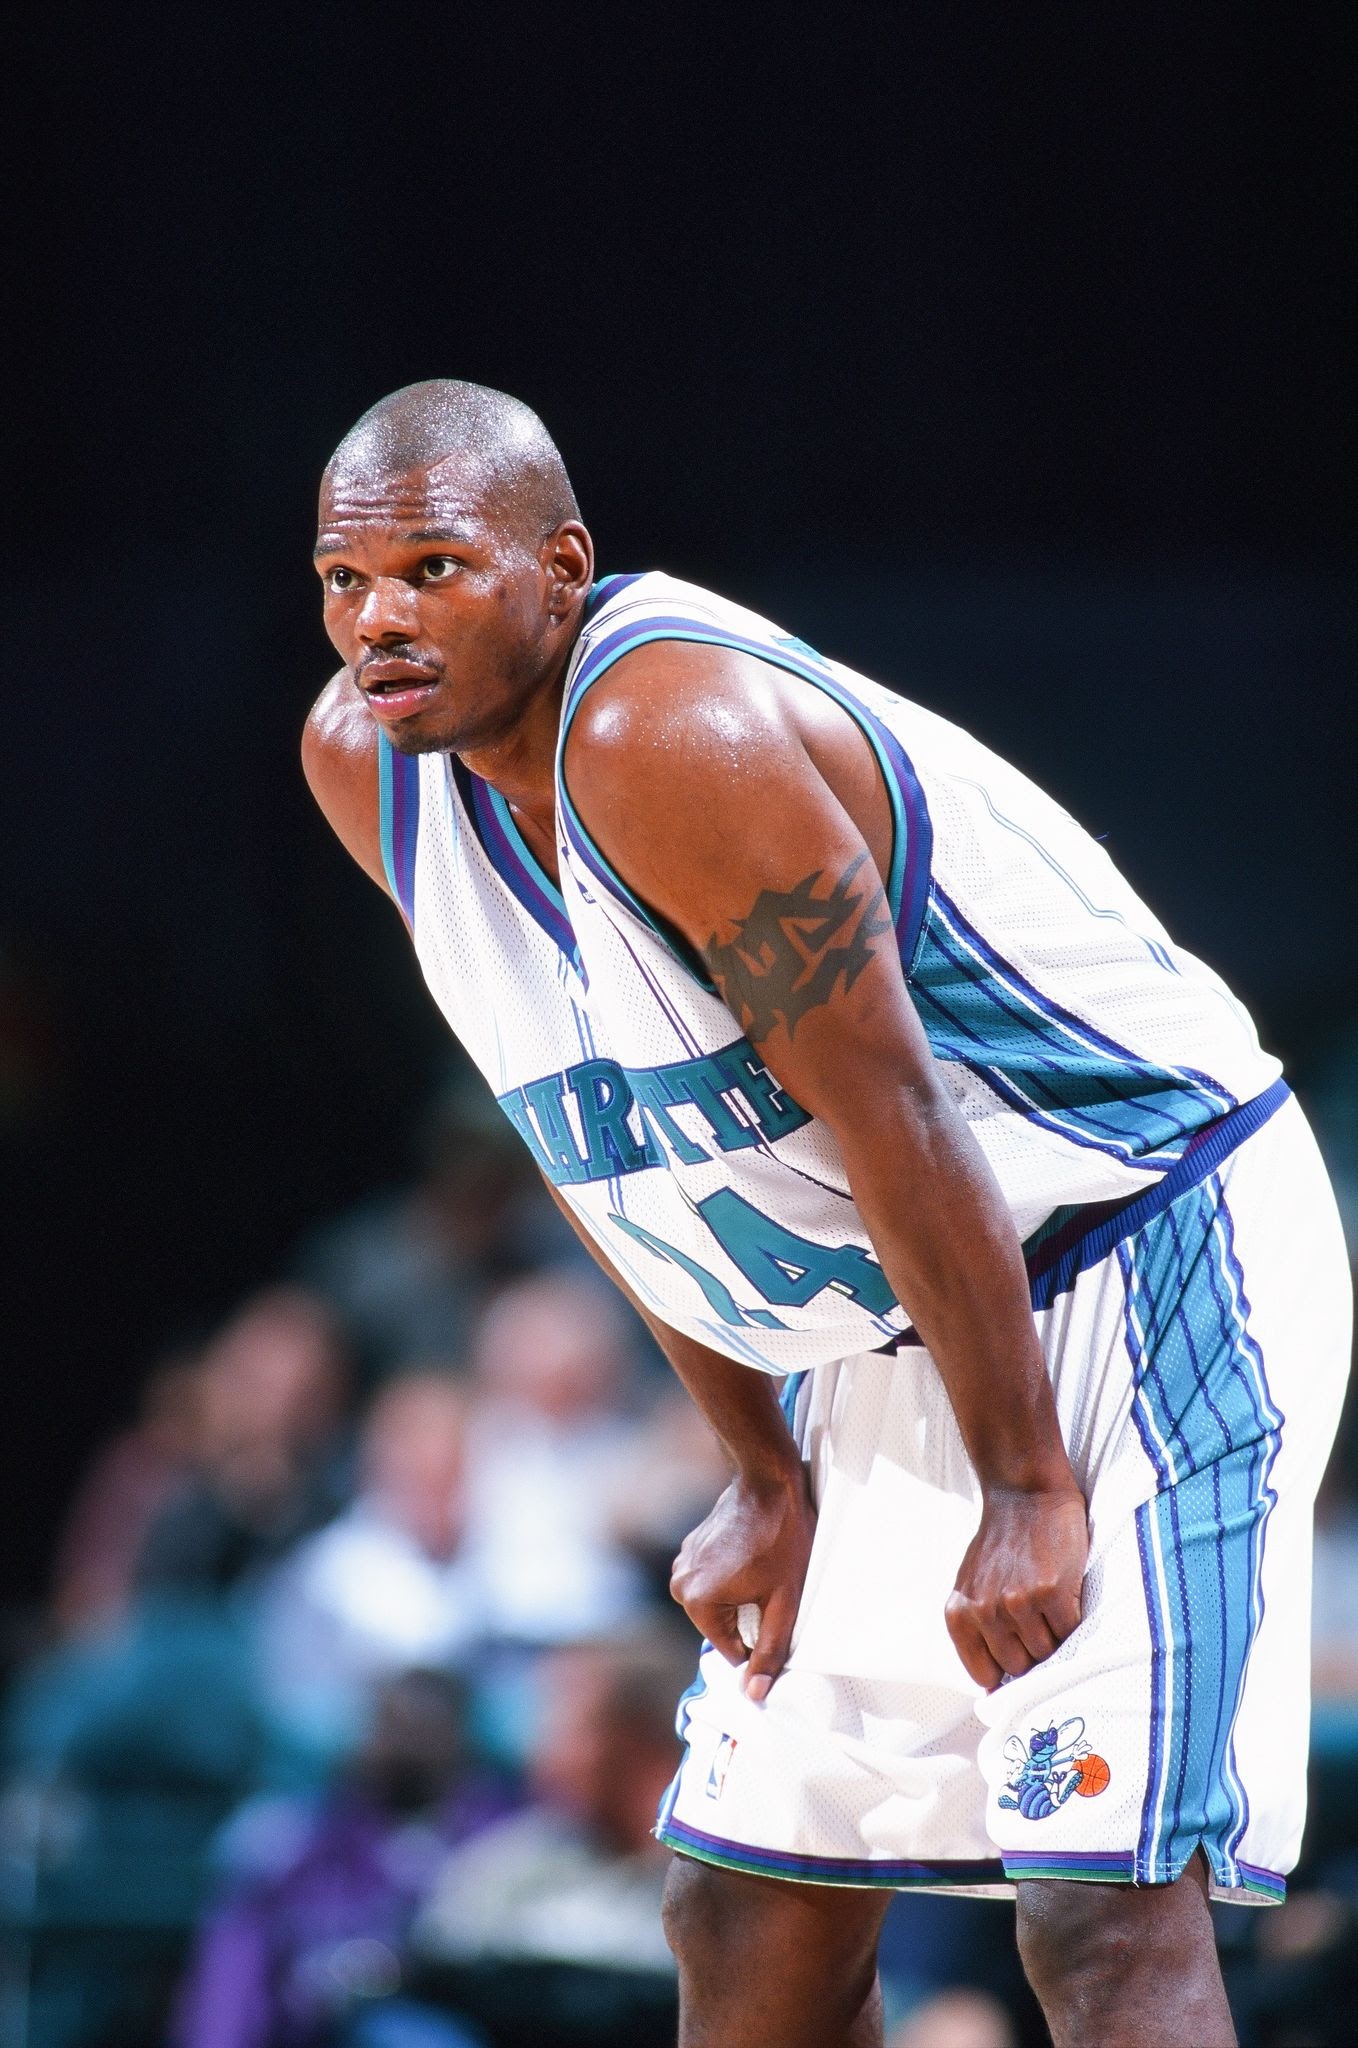 Jamal Mashburn, Inducted into the NYC Hall of Fame in 2006